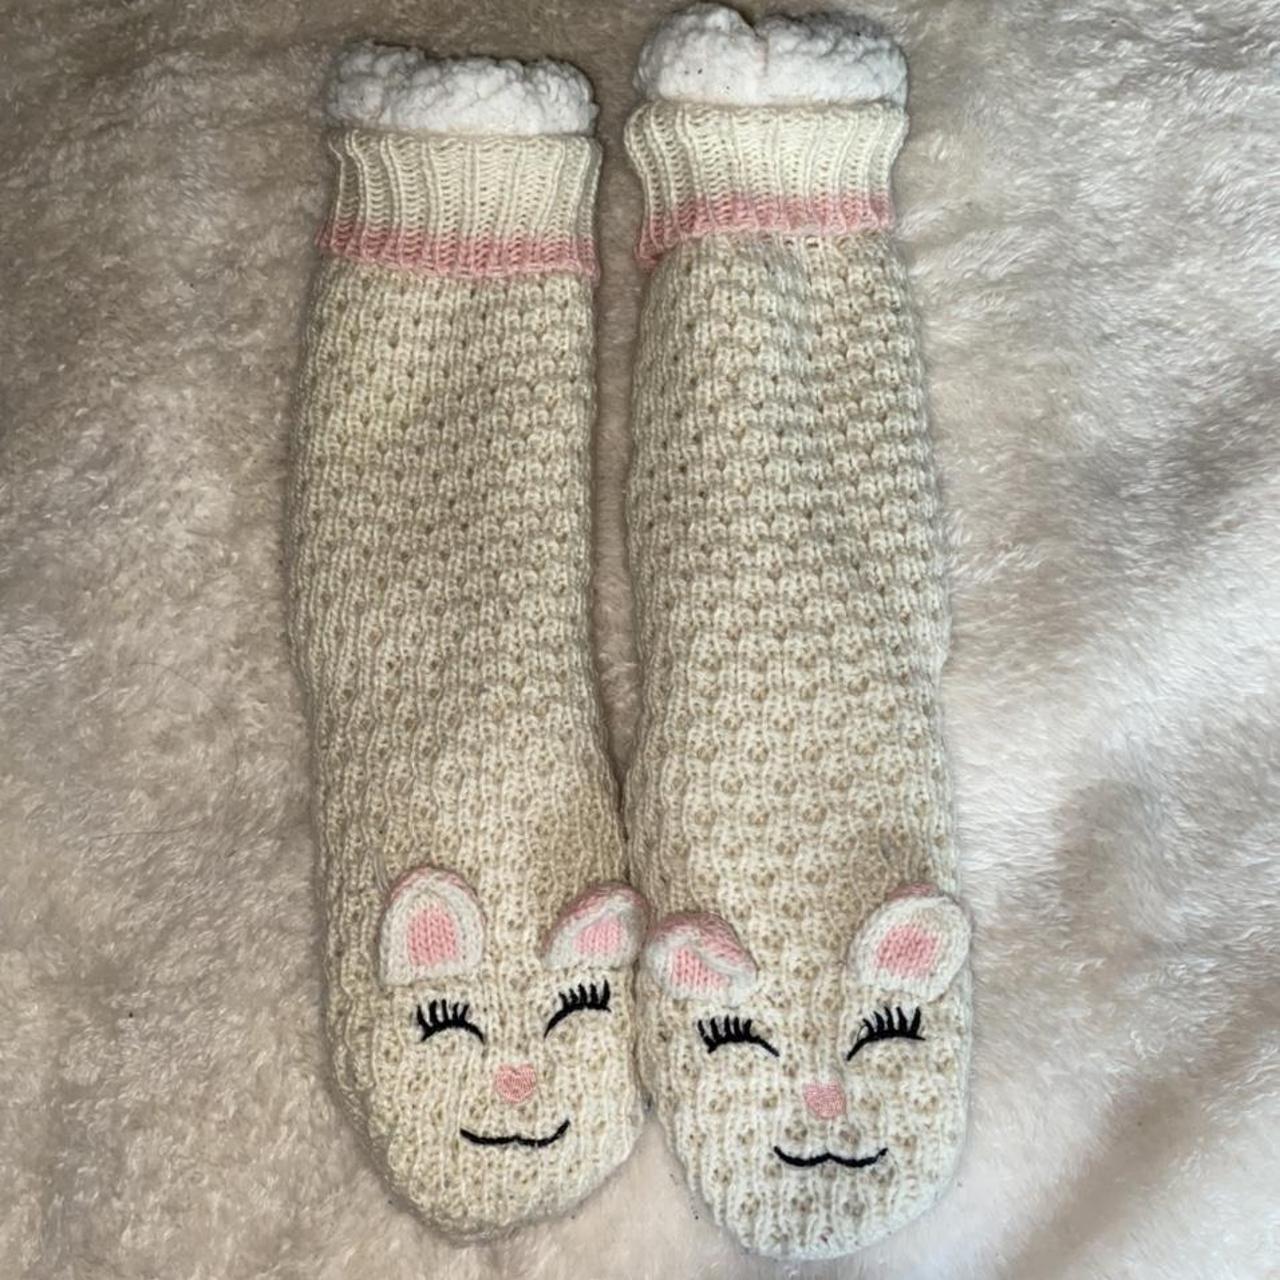 Product Image 1 - super comfy fuzzy socks!

- sheep